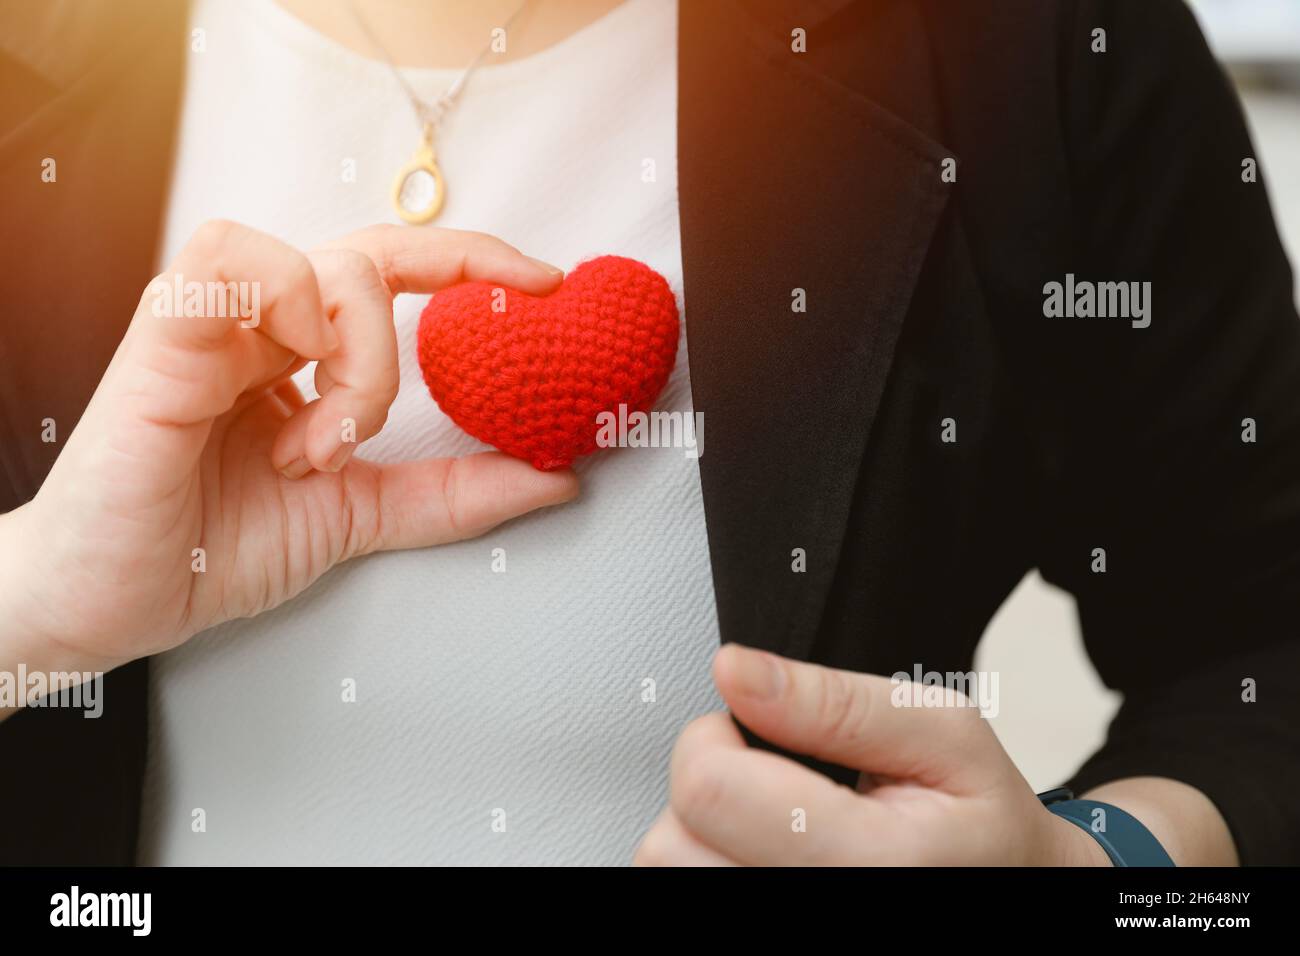 business people office employee have service mind work with care and sincere from heart heartfulness concept. Stock Photo